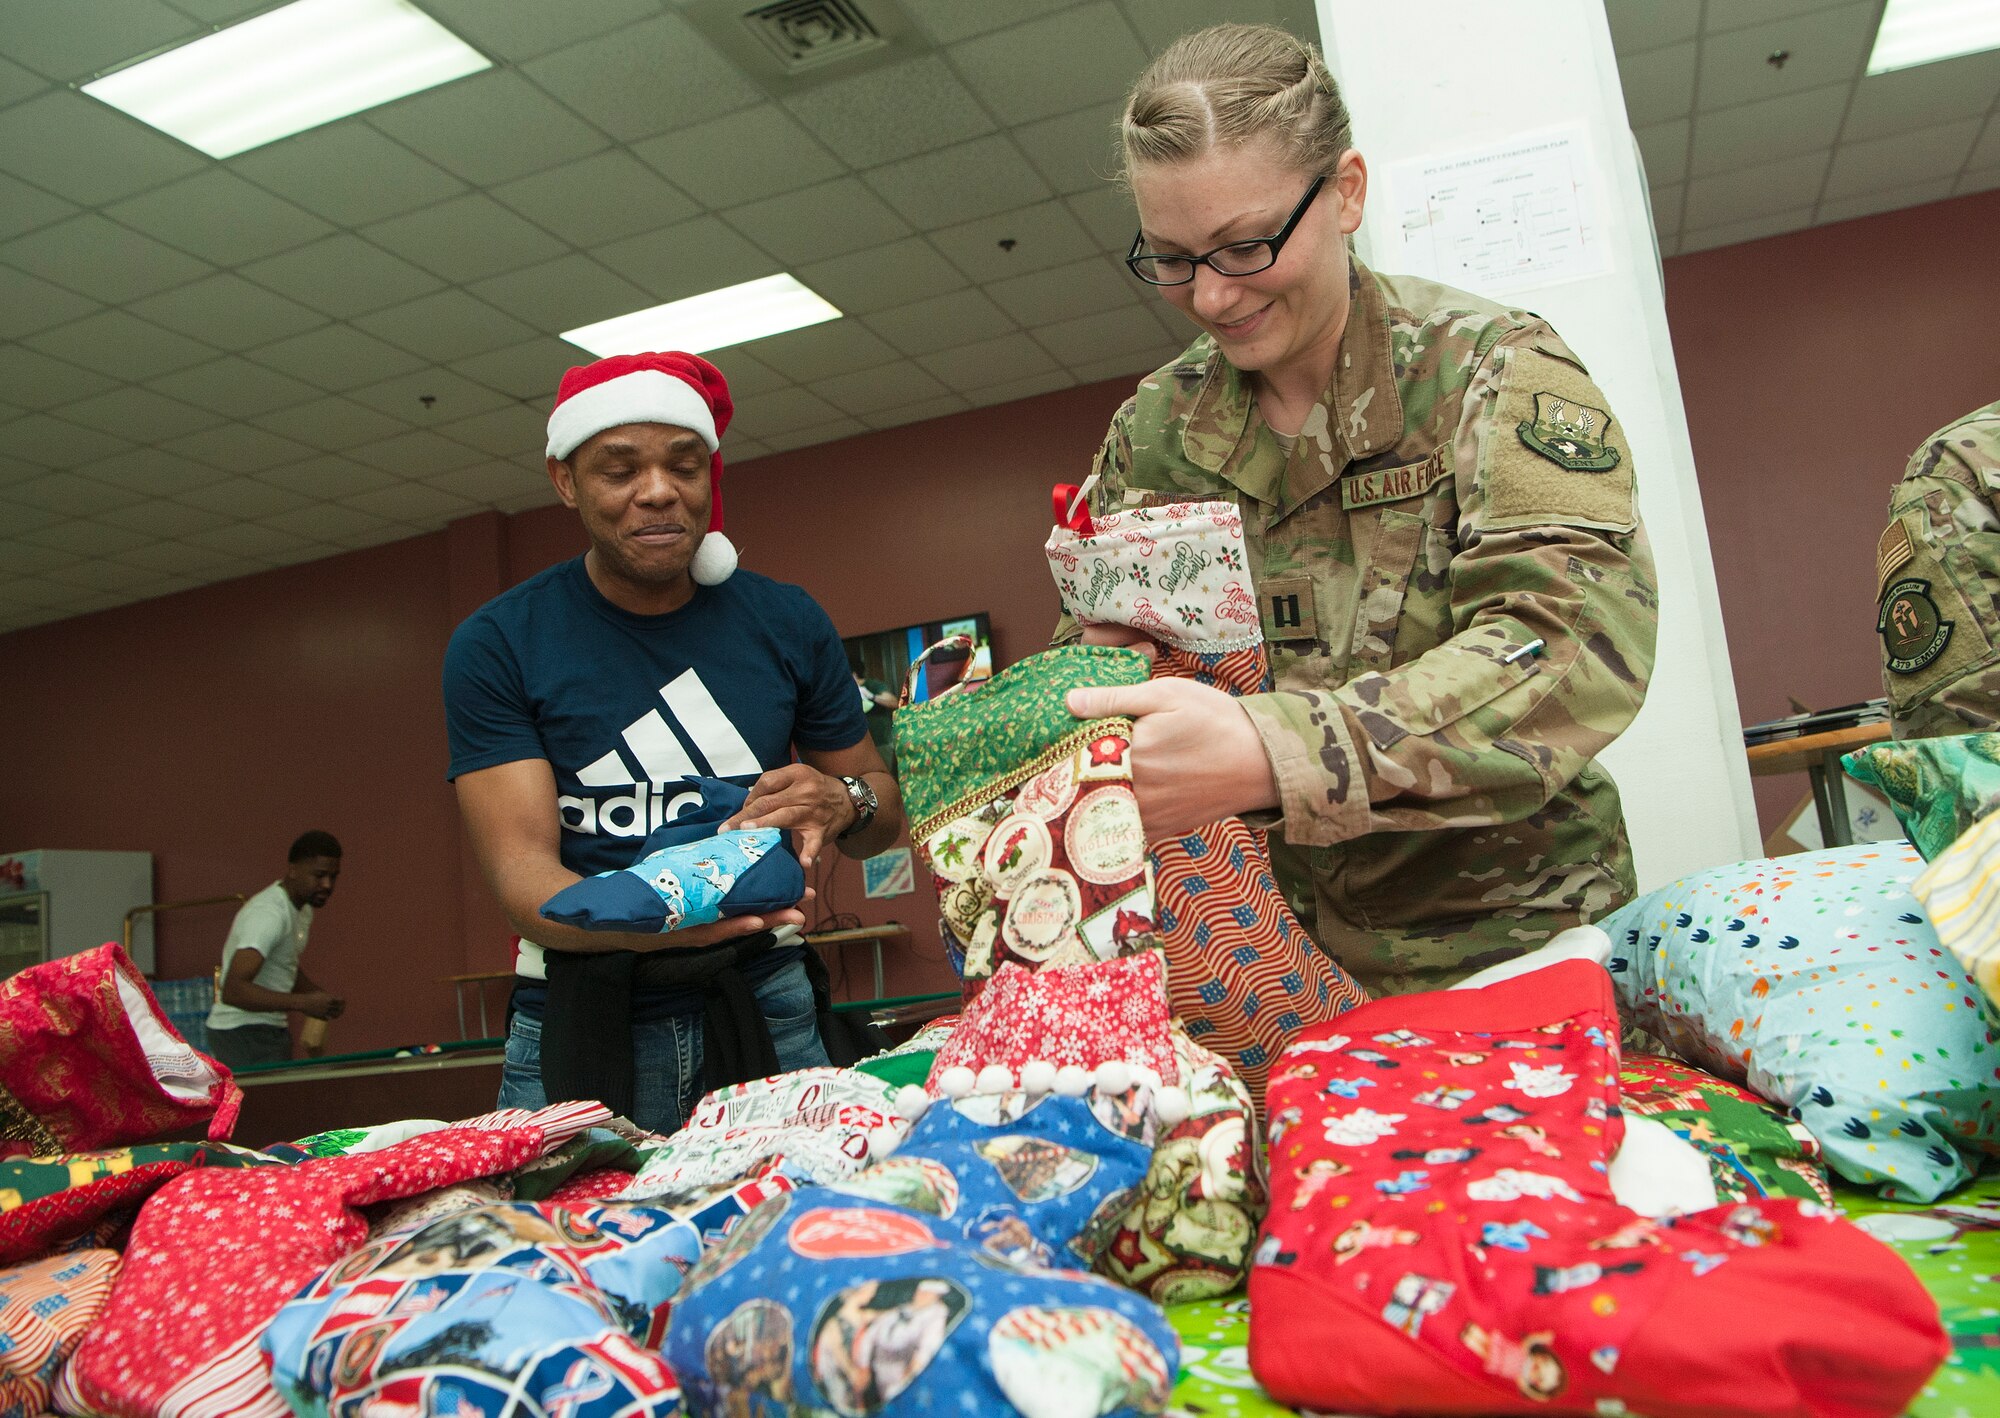 Capt. Beth Brustuen, right, 379th Expeditionary Medical Group mental health clinic officer-in-charge, and Capt. Victor Eguaibor, 379th EMDG mental health clinic licensed social worker, hand out stockings to service members and their families during a holiday kick-off event Dec. 1, 2018, at Al Udeid Air Base, Qatar. Service members and their families were able to play holiday games, watch live music performances, interact with Santa Claus and watch a tree lighting ceremony, during the event. (U.S. Air Force photo by Tech. Sgt. Christopher Hubenthal)